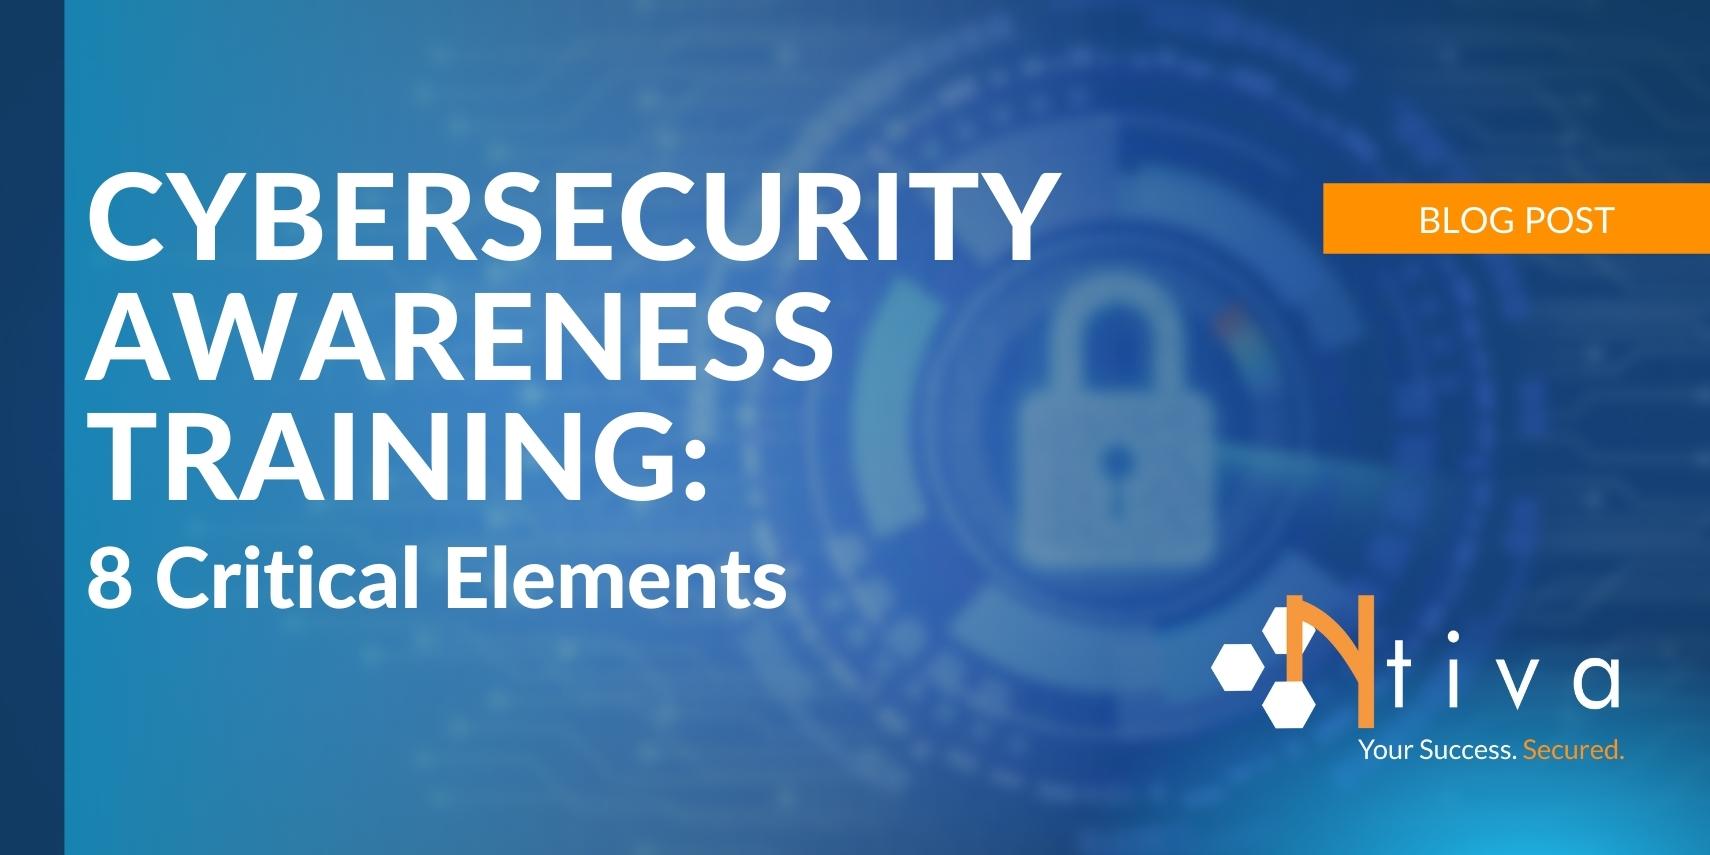 Cybersecurity Awareness Training: 8 Critical Elements